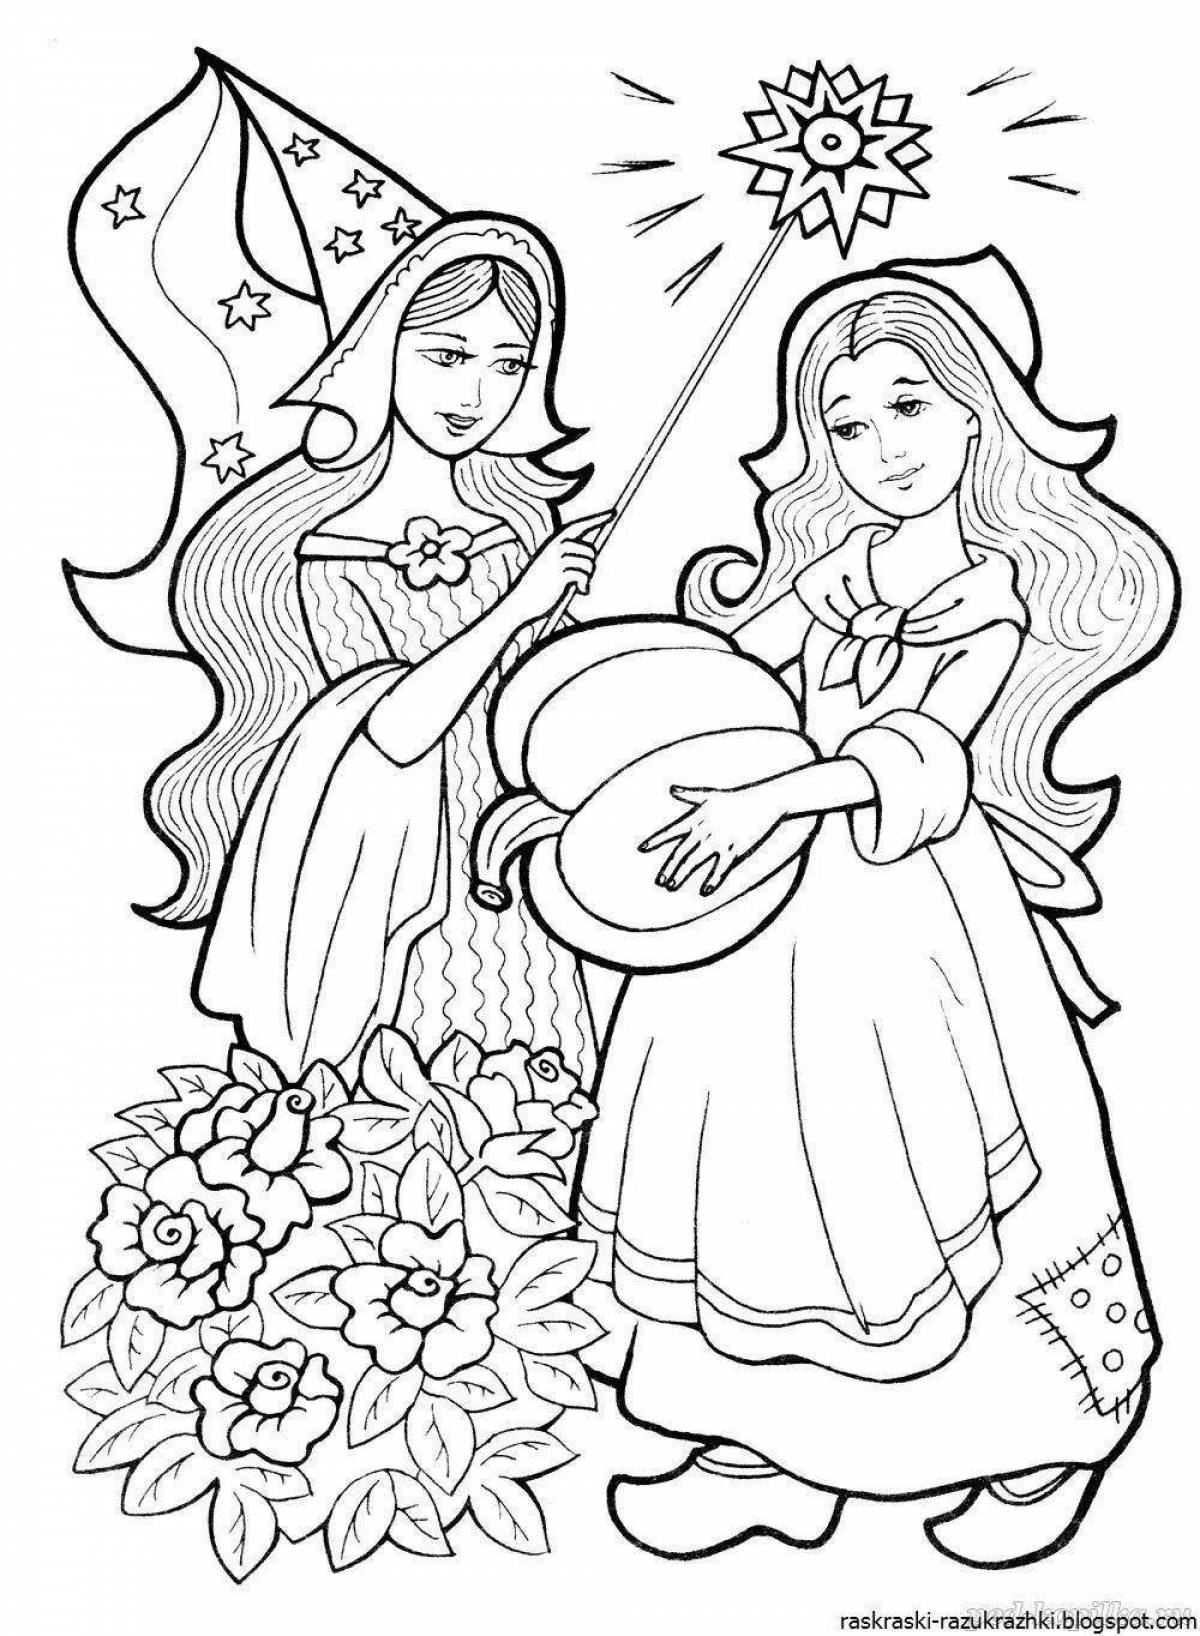 Sparkling coloring book from perrault's tales